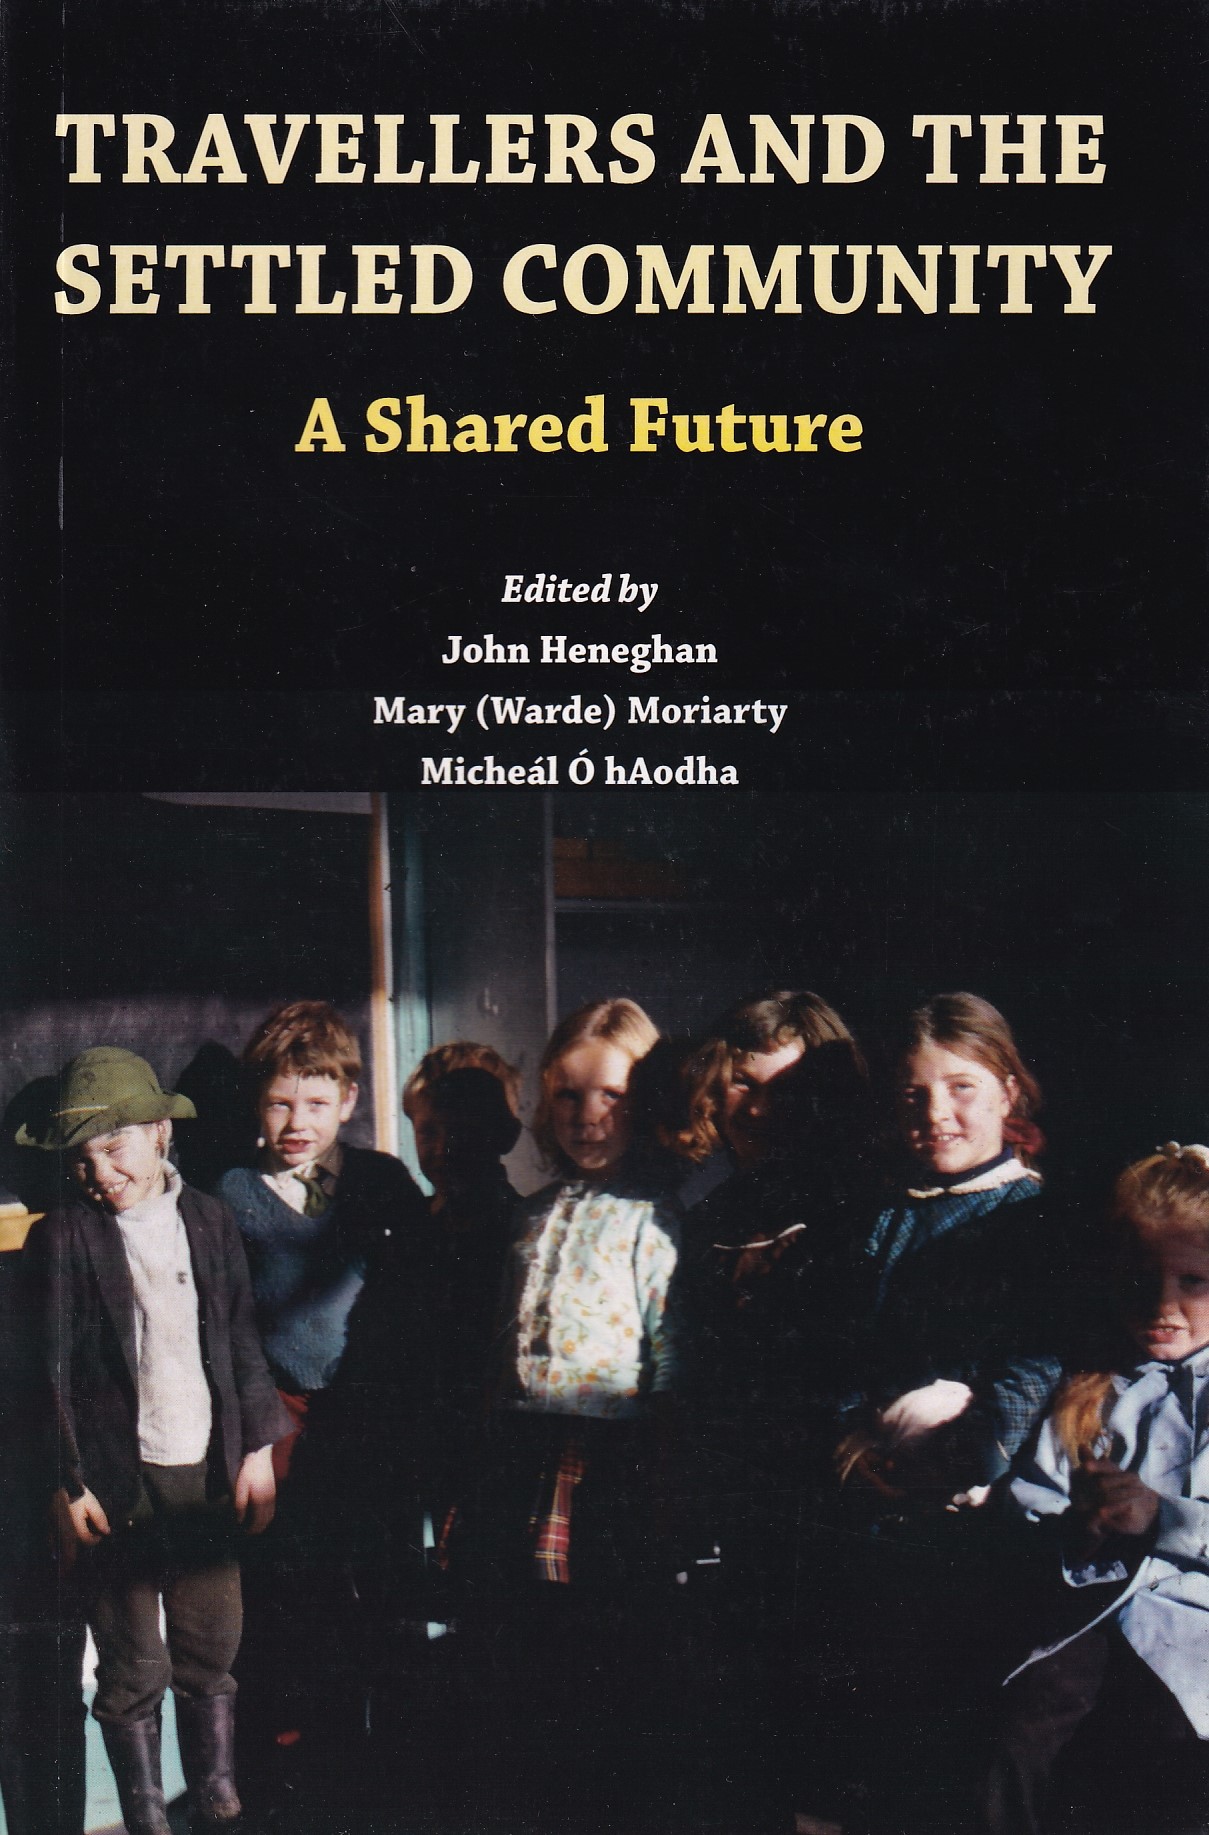 Travellers and the Settled Community: A Shared Future by John Heneghan, Mary (Warde) Moriarty & Micheál Ó hAodha (eds.)